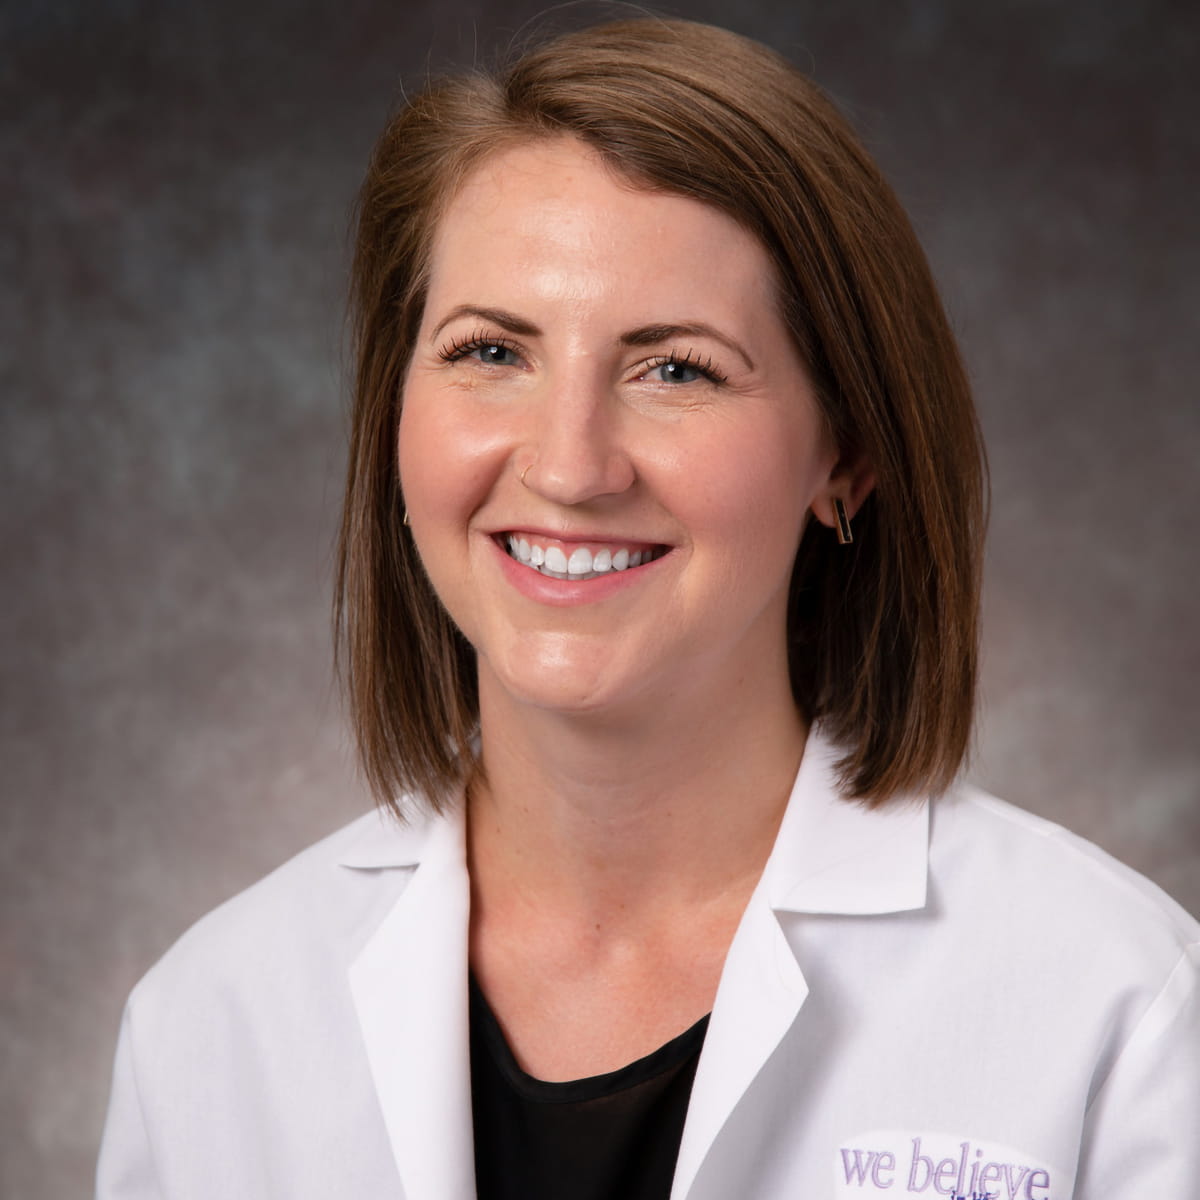 A friendly headshot of Catherine Mcclure, MD